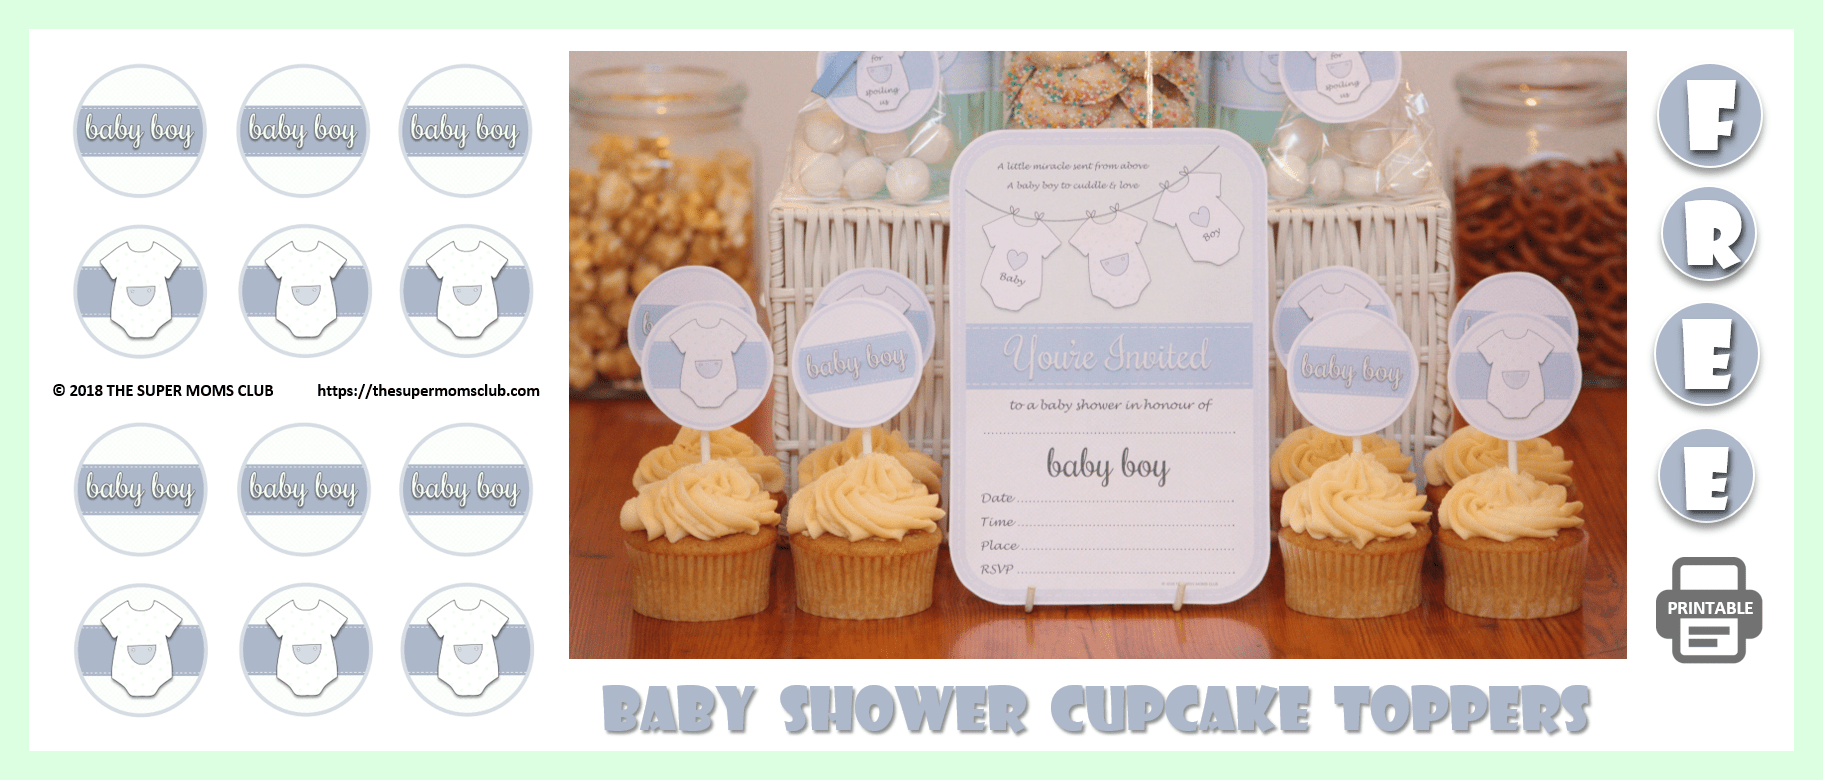 Babygrow Themed Baby Shower For A Boy FREE PRINTABLE Cupcake Toppers - The Super Moms Club